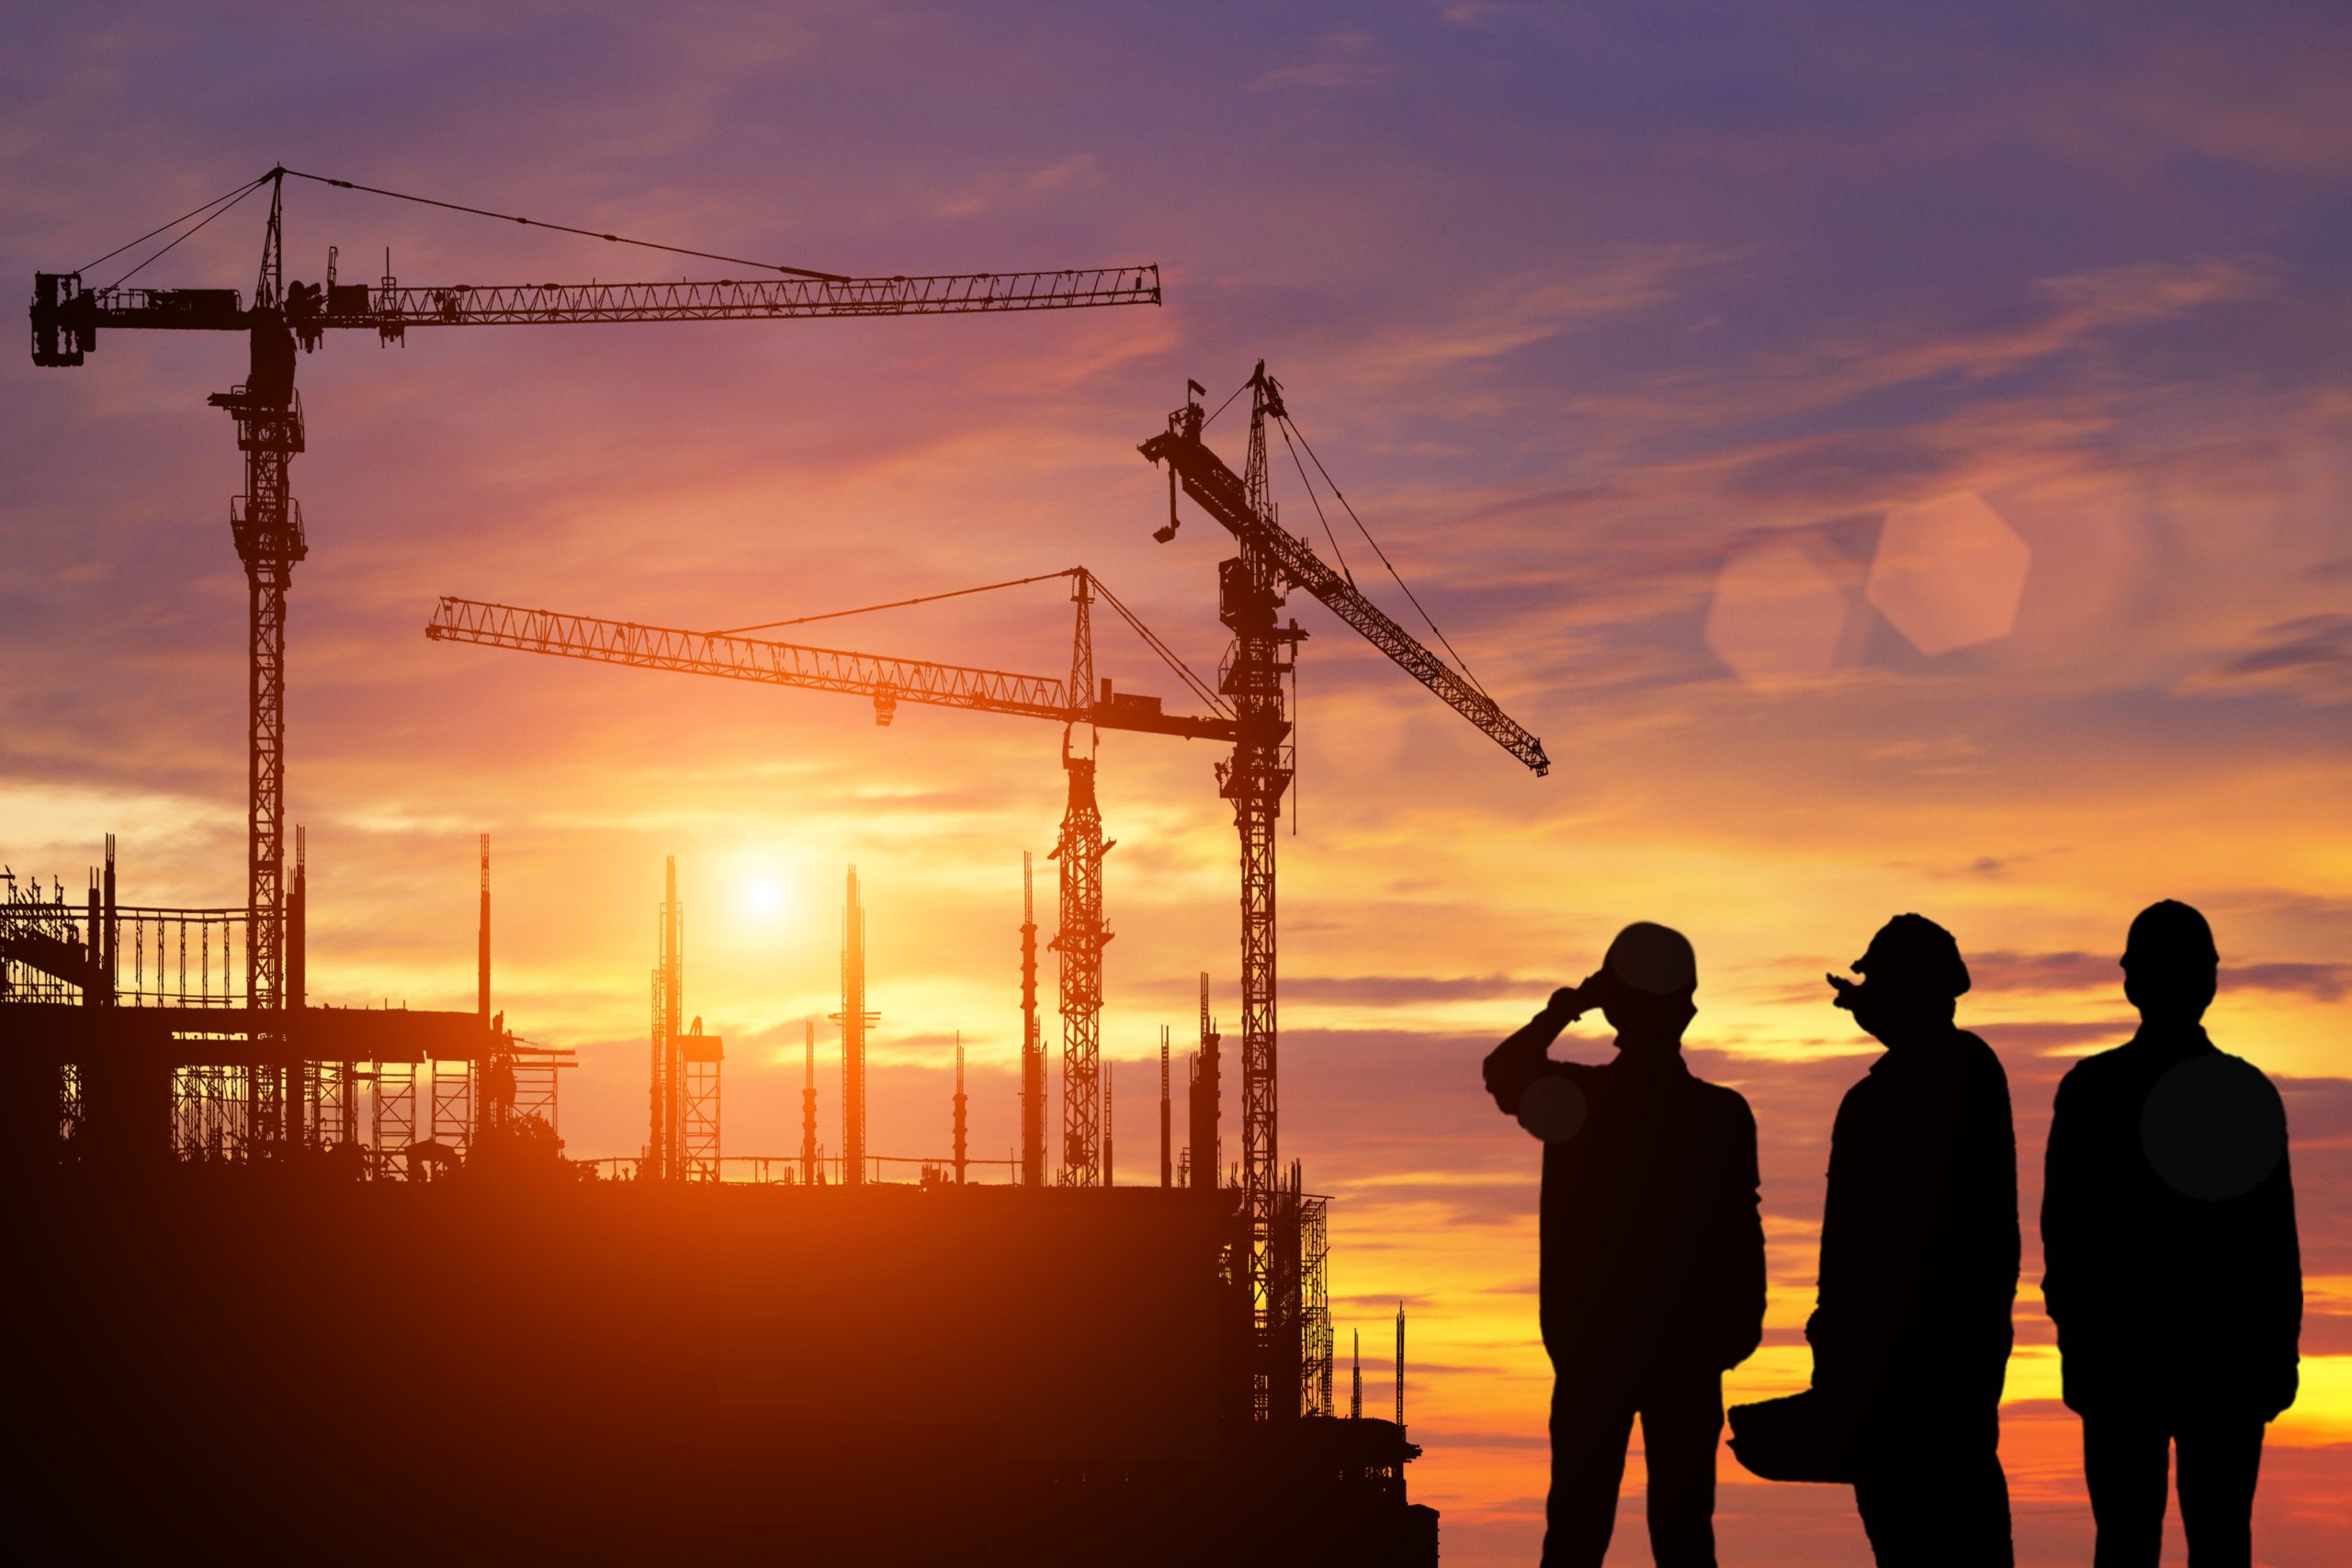 Engineers,Work,In,Front,Of,The,Construction,Site,At,Sunset.